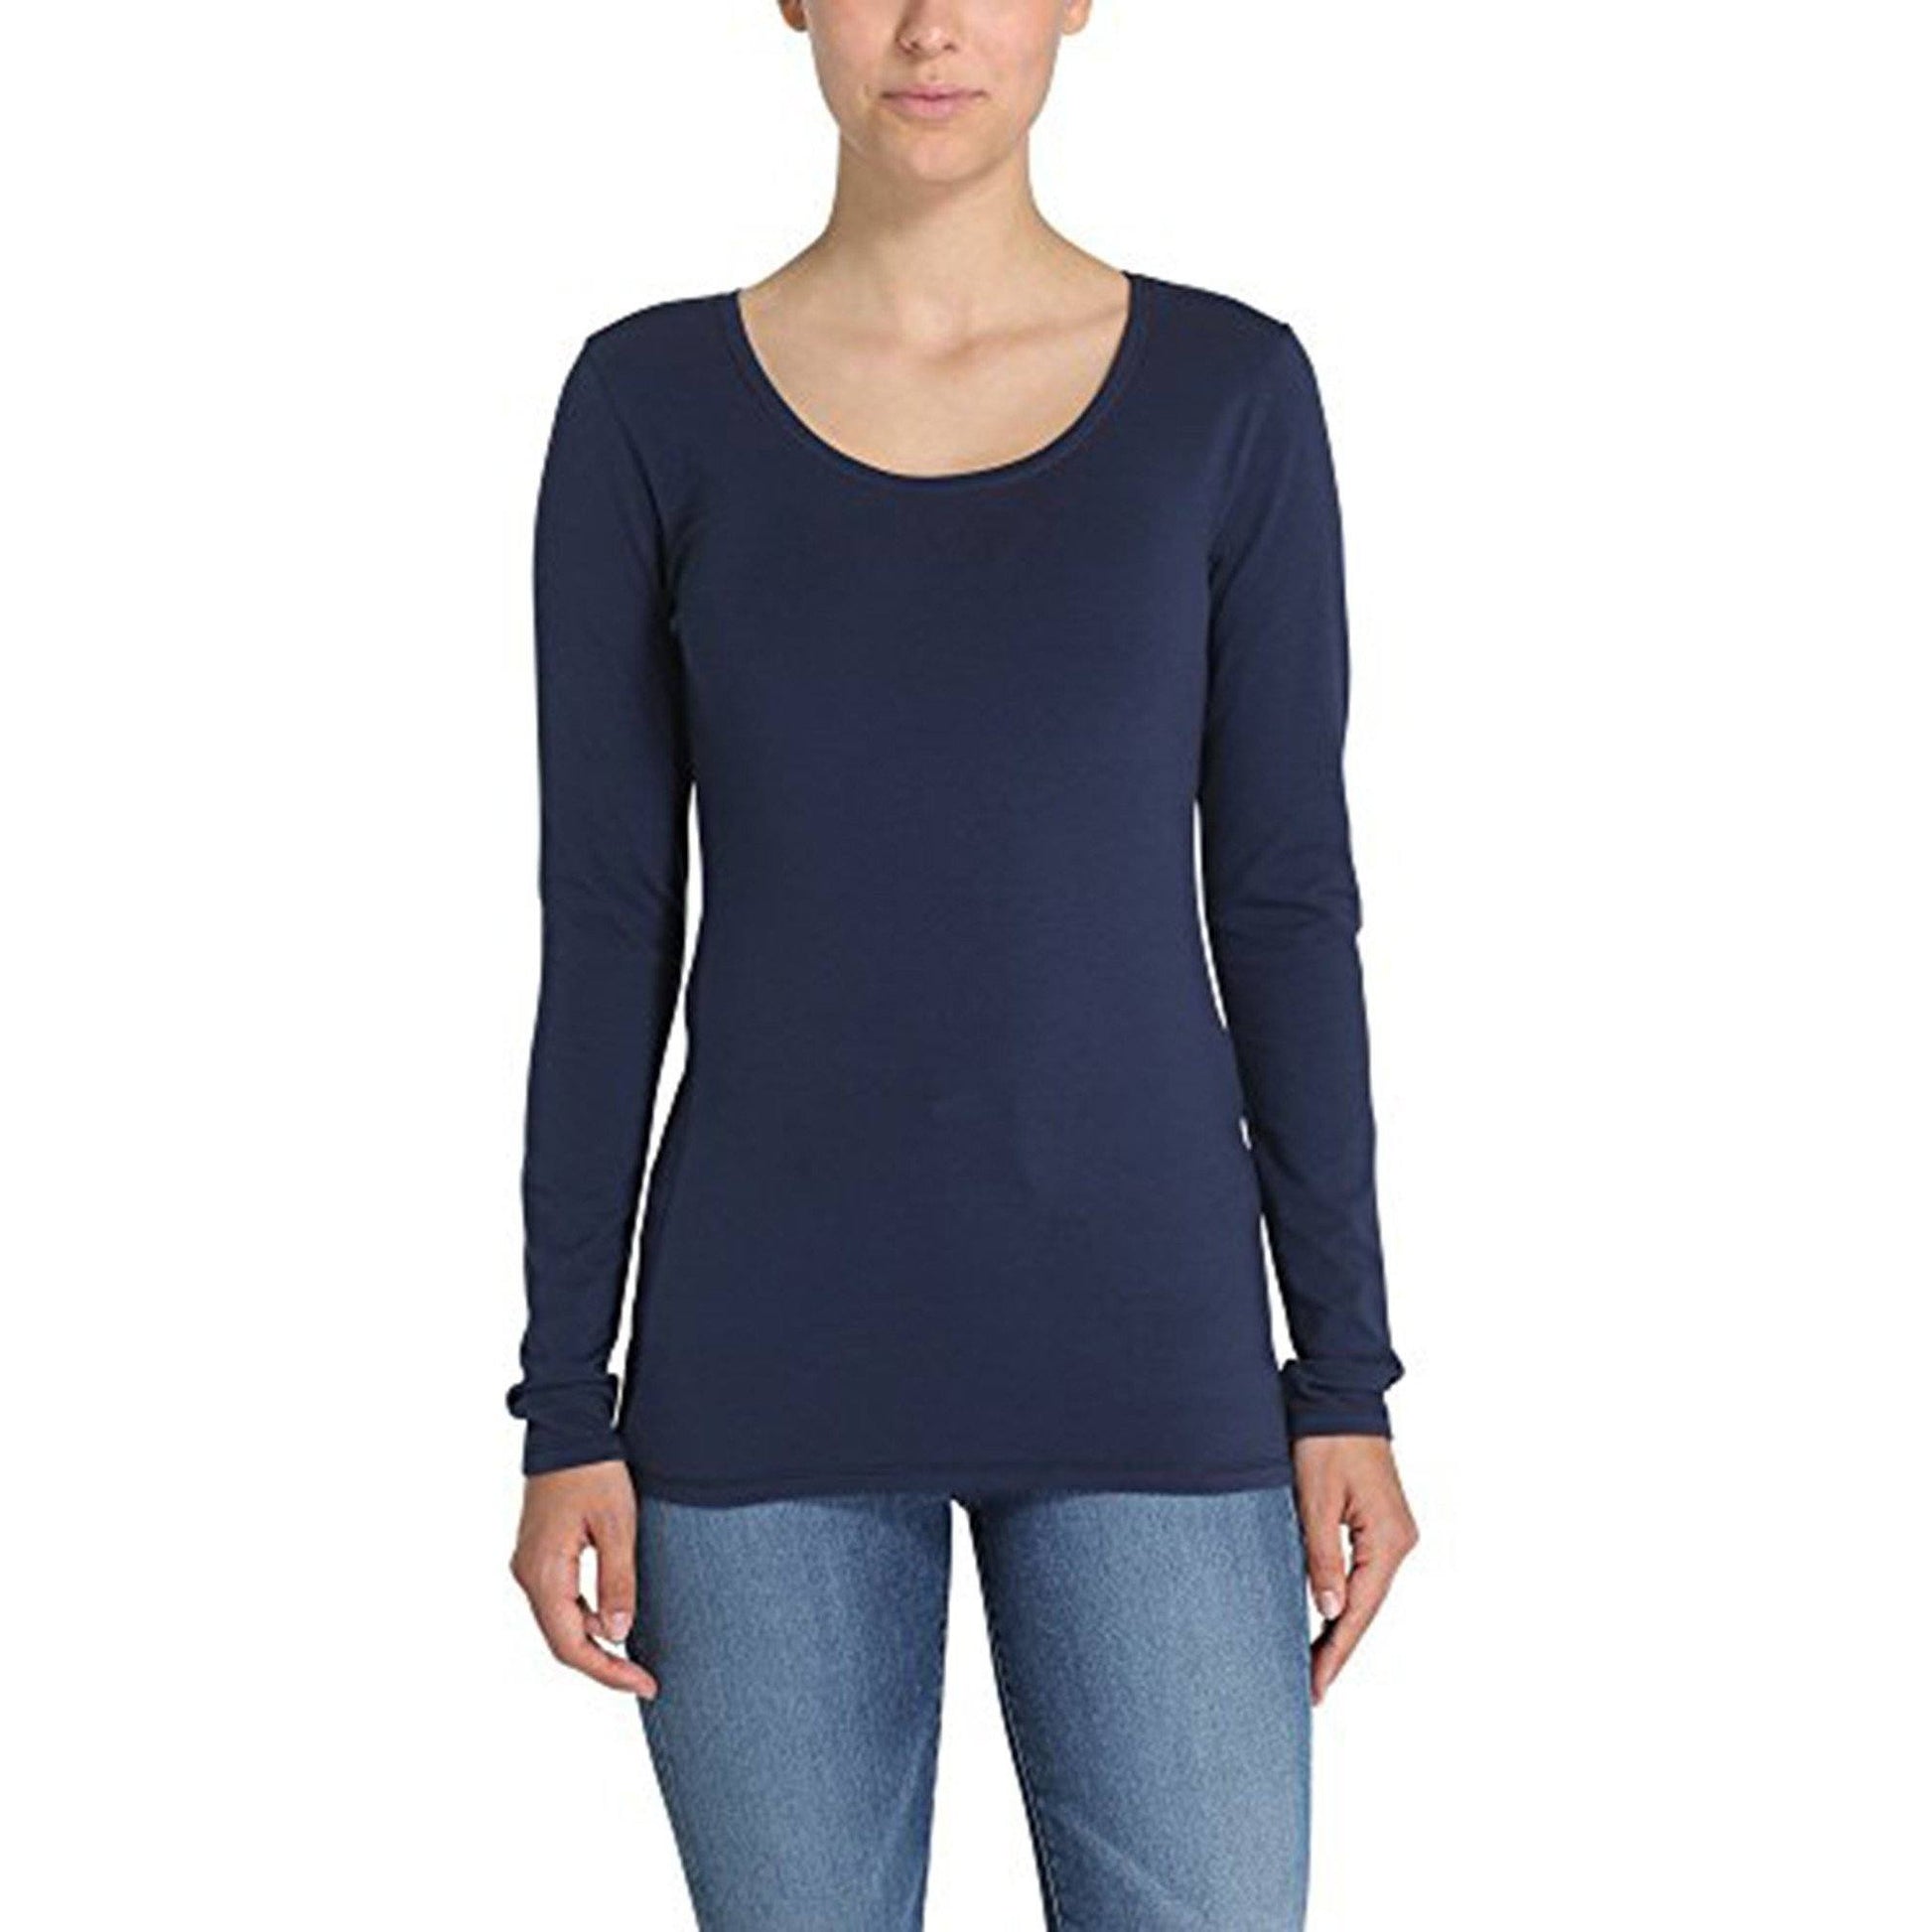 Berydale Women's Long-Sleeve Tee: Elegance in 100% BCI Combed Cotton Navy S 